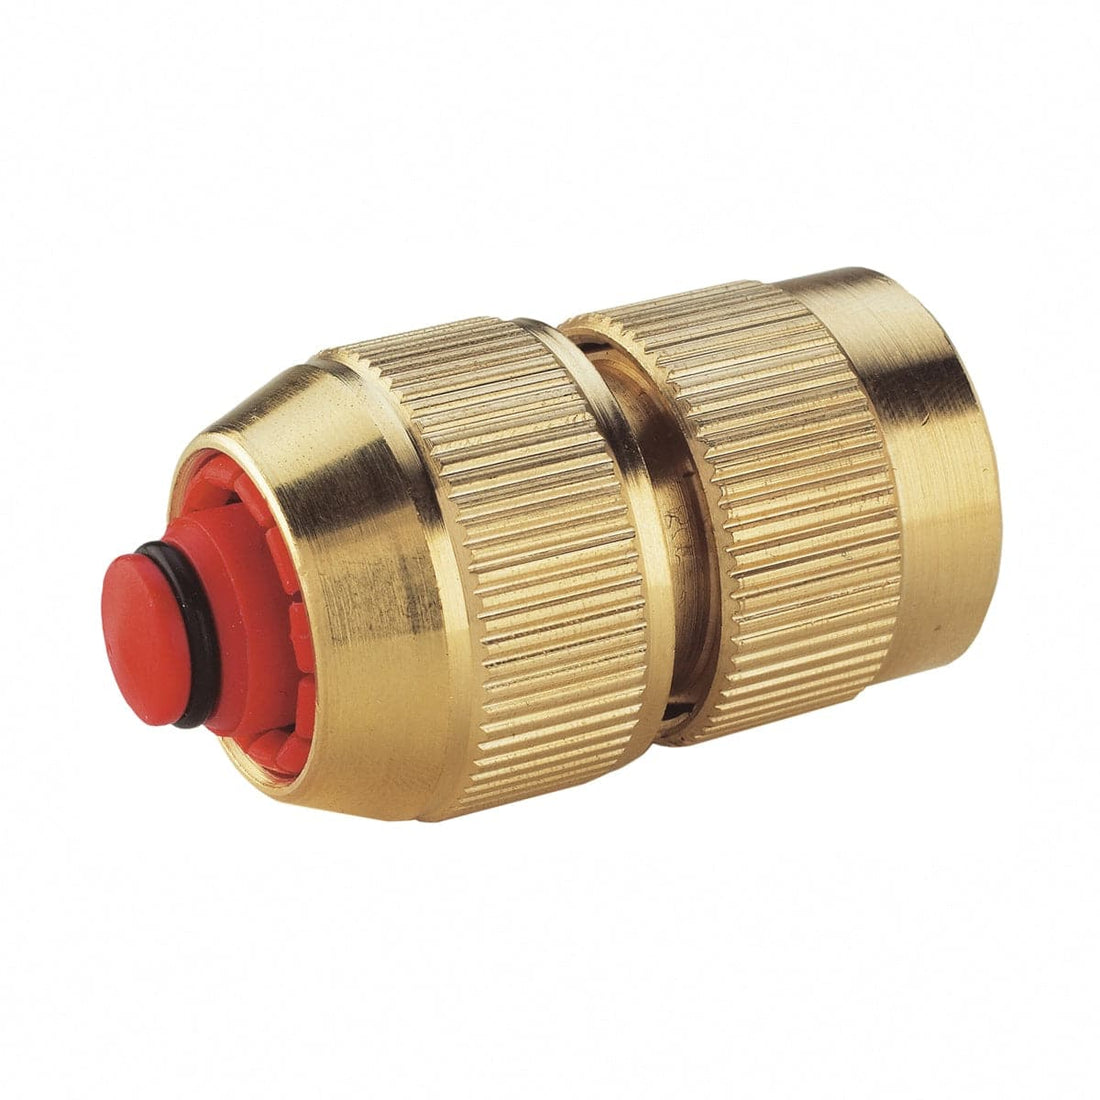 BRASS QUICK COUPLING WITH AQUASTOP FOR PIPE DIAMETER 12 AND 15 MM COLORTAP - best price from Maltashopper.com BR500410128